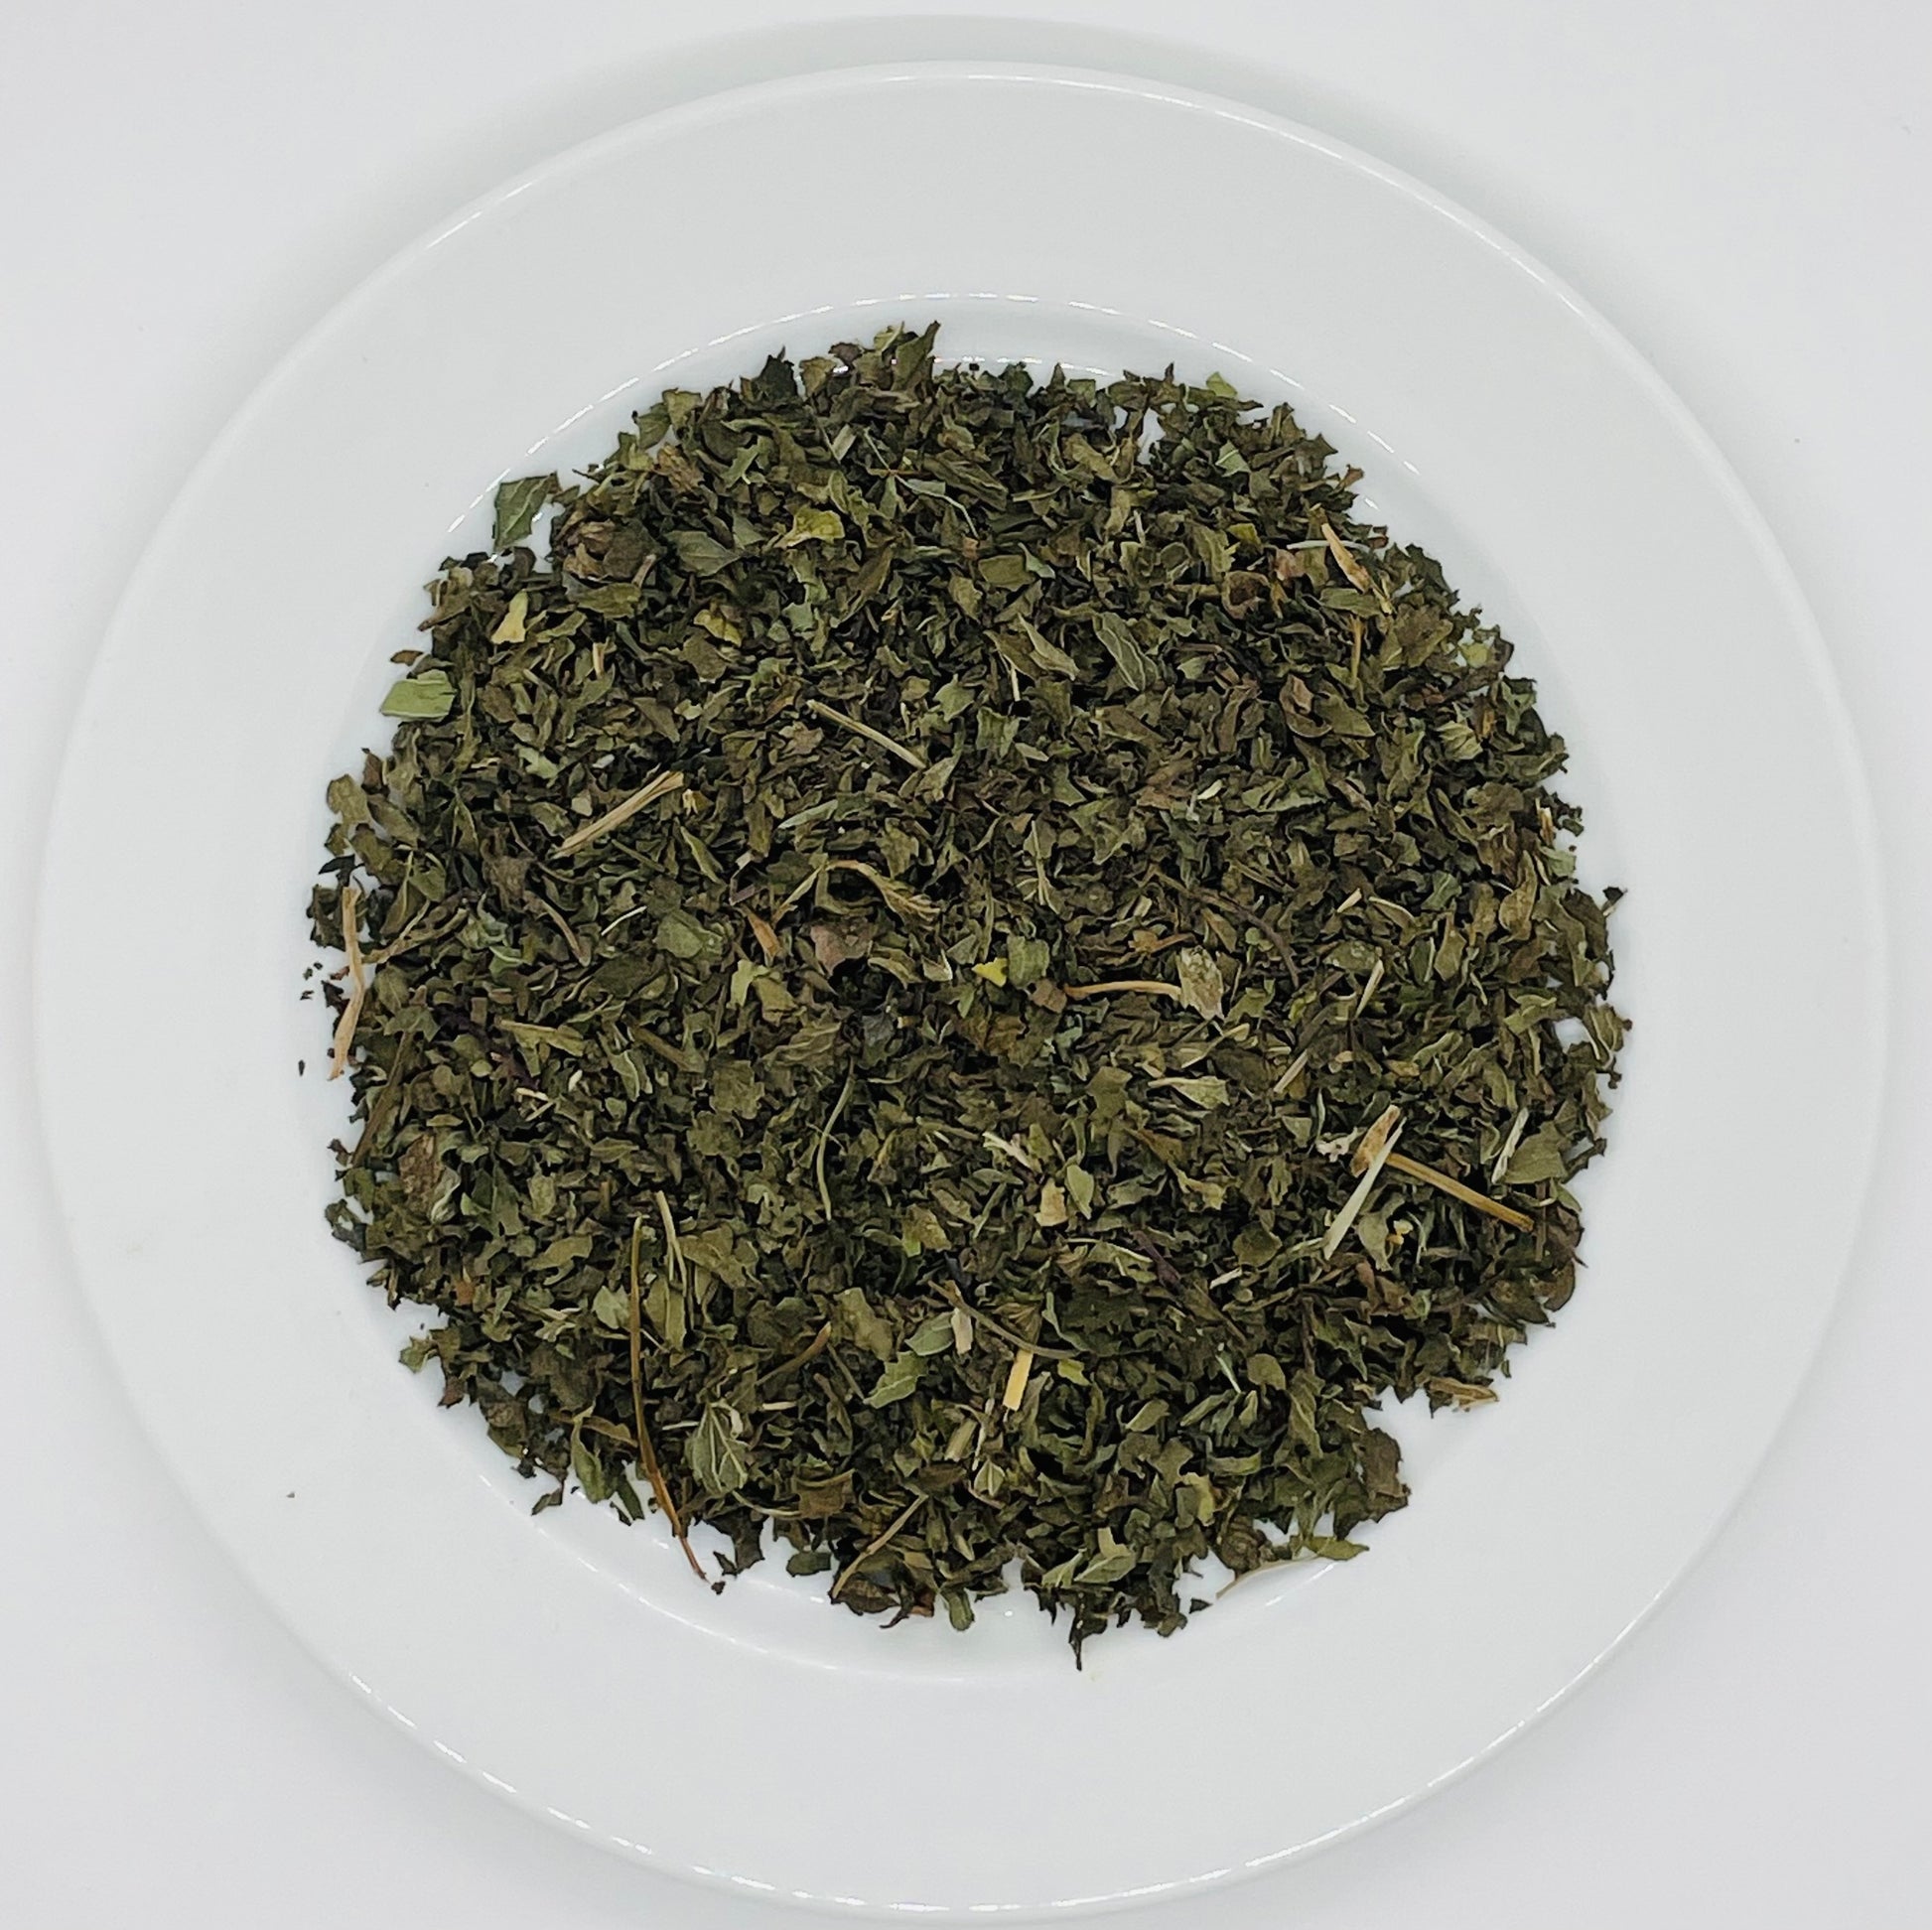 Naturally green loose leaves of dried peppermint tea.